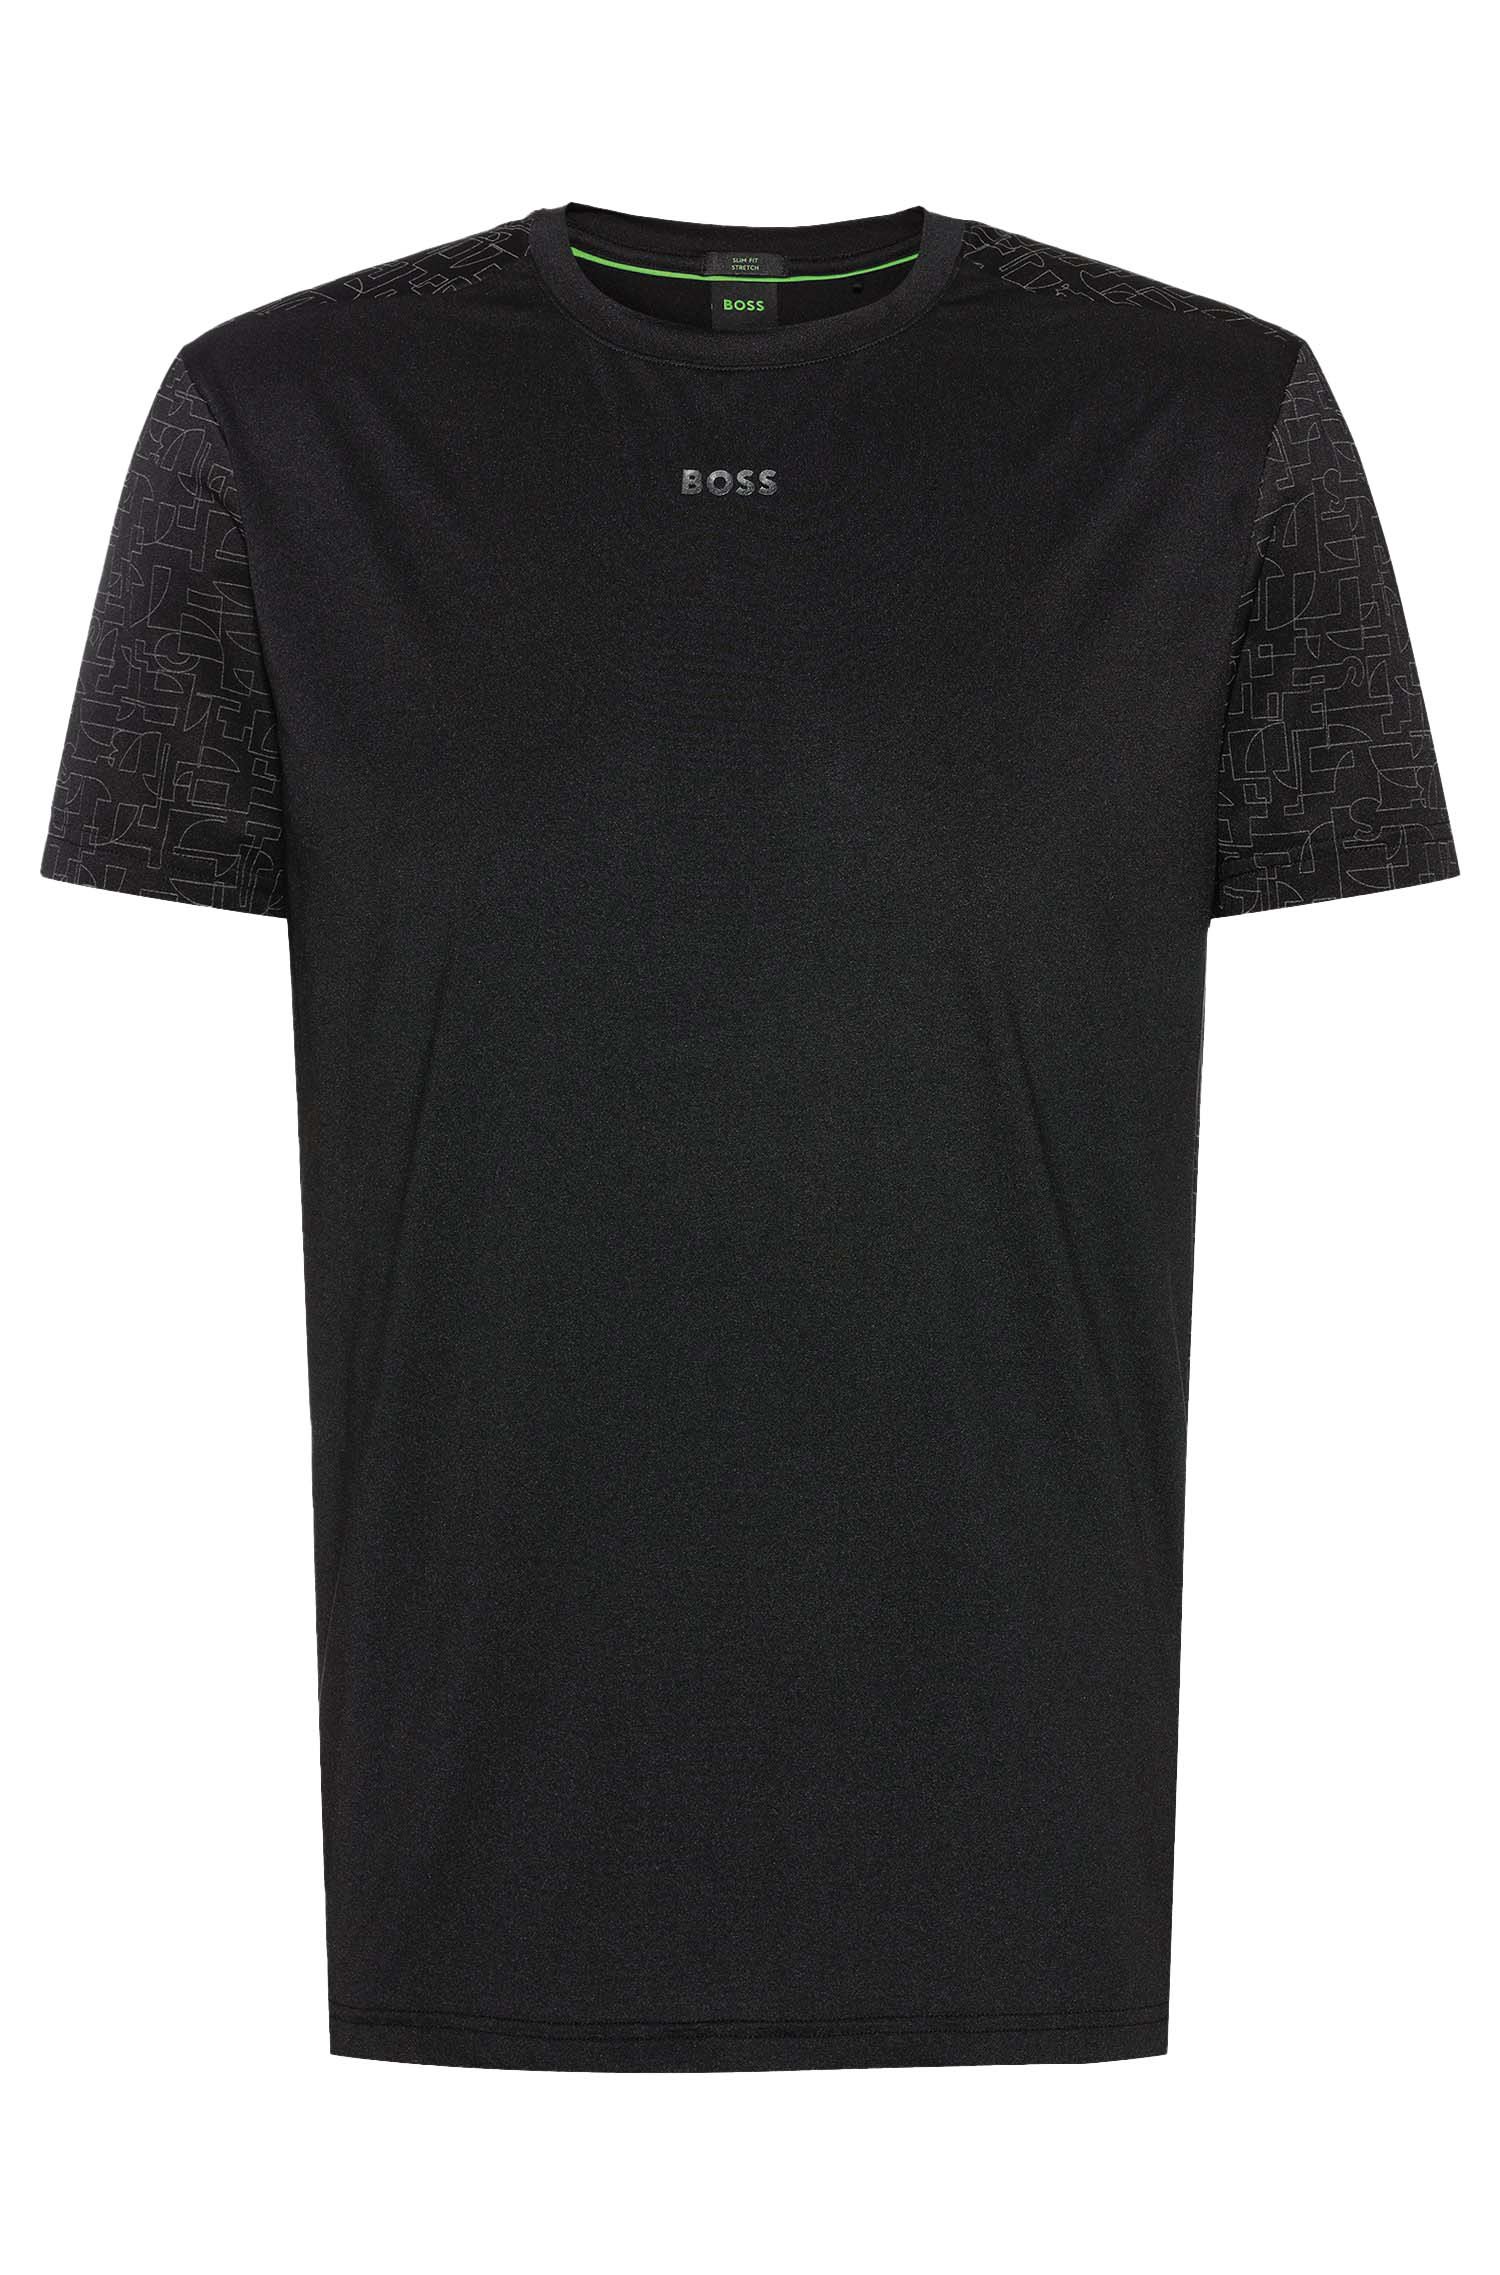 BOSS SLIM-FIT T-SHIRT WITH DECORATIVE REFLECTIVE PATTERN (BLACK) - S ...